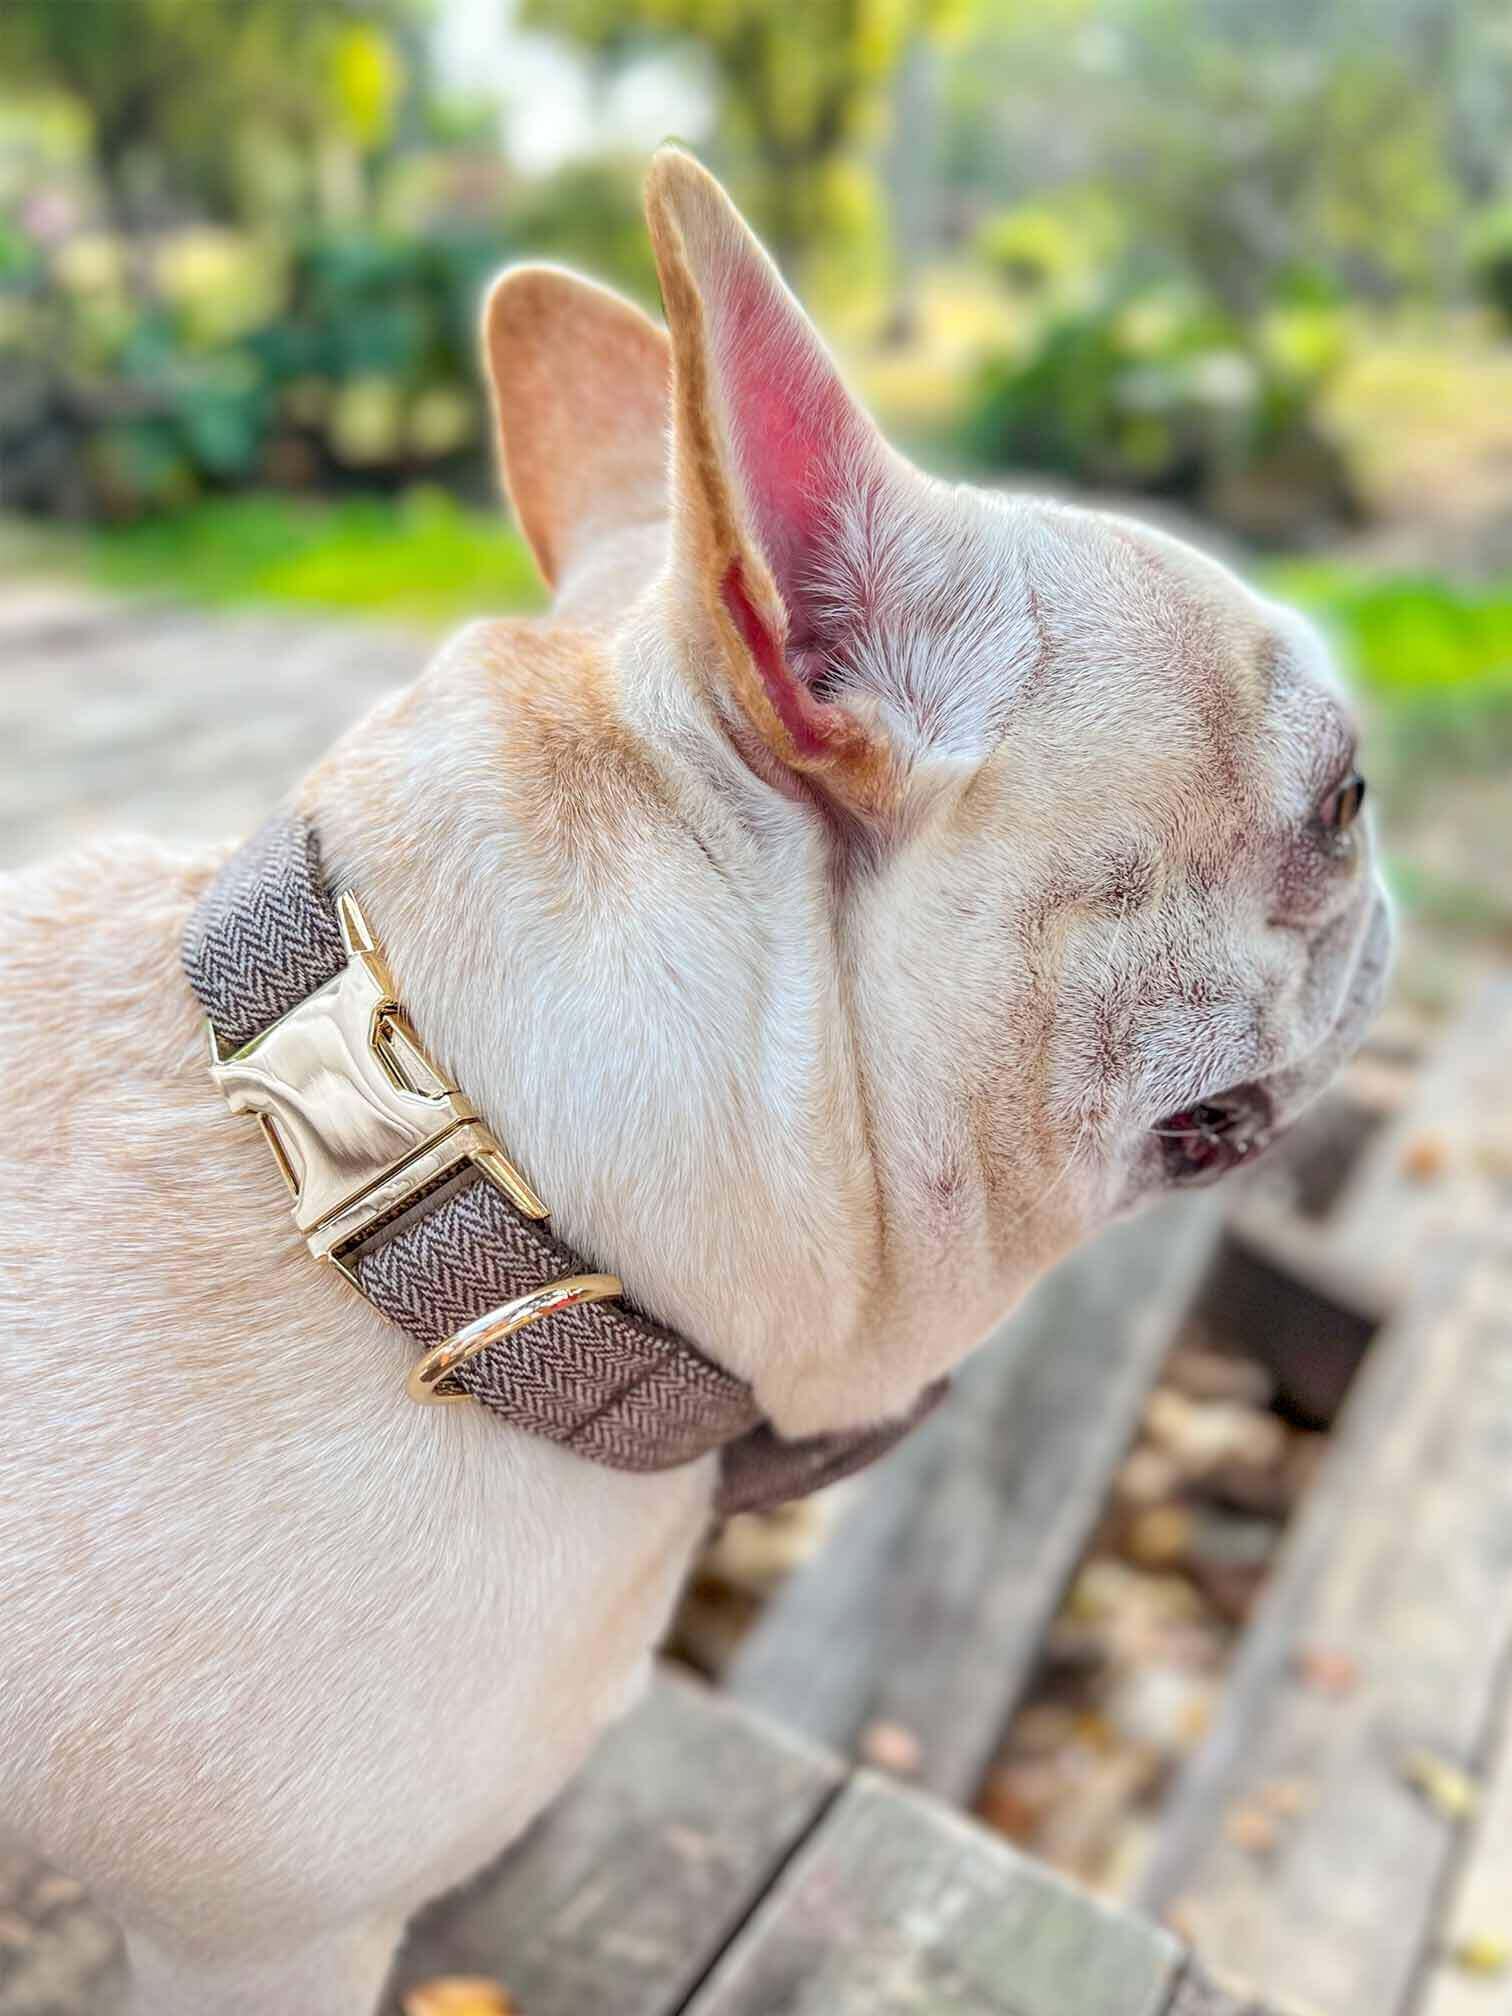 Dog Brown Collar Leash Set - Frenchiely